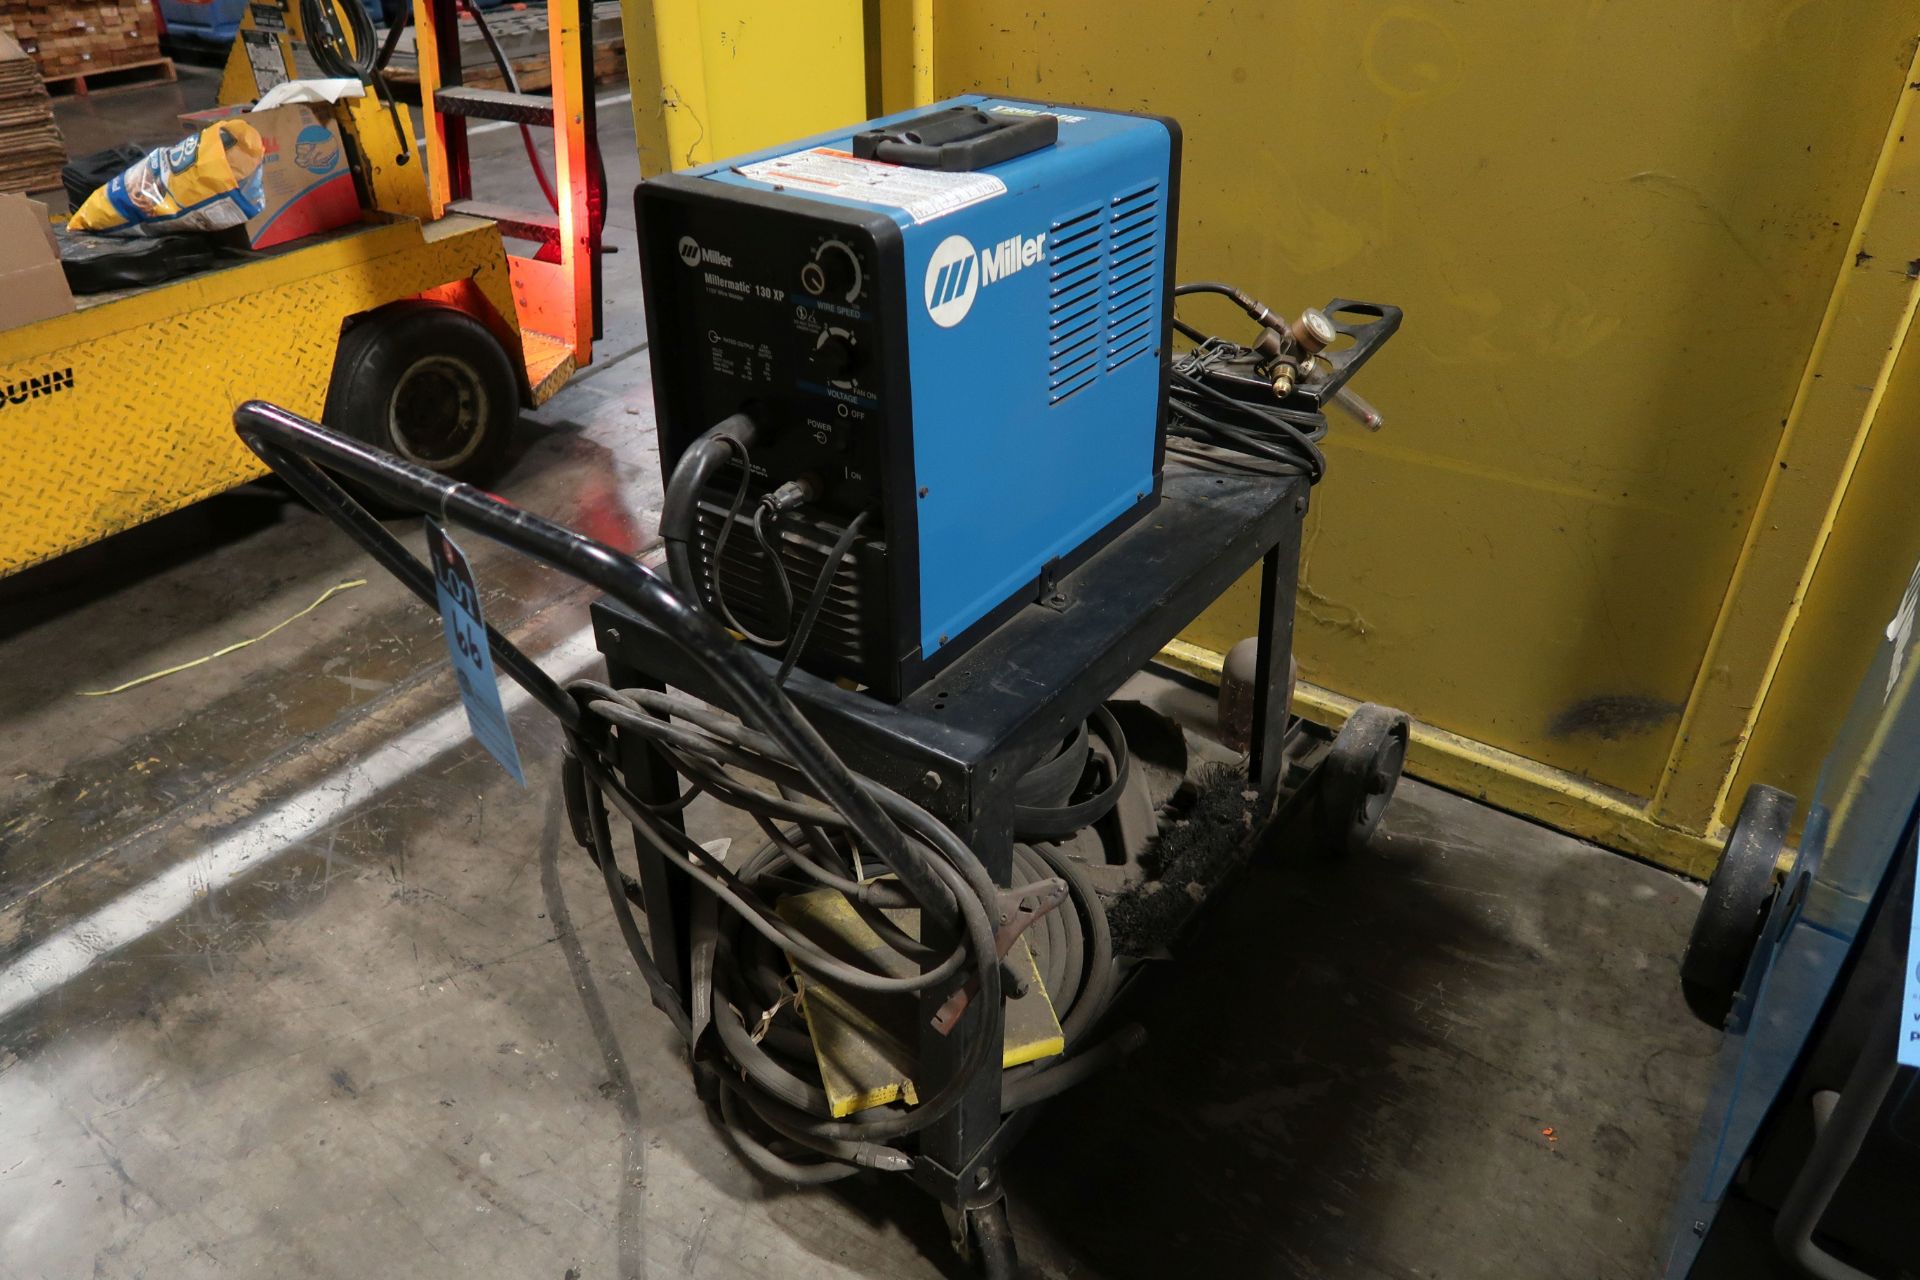 90 AMP MILLER MILLERMATIC 130XP 115 VOLT WIRE FEED WELDER WITH CART - Image 2 of 5